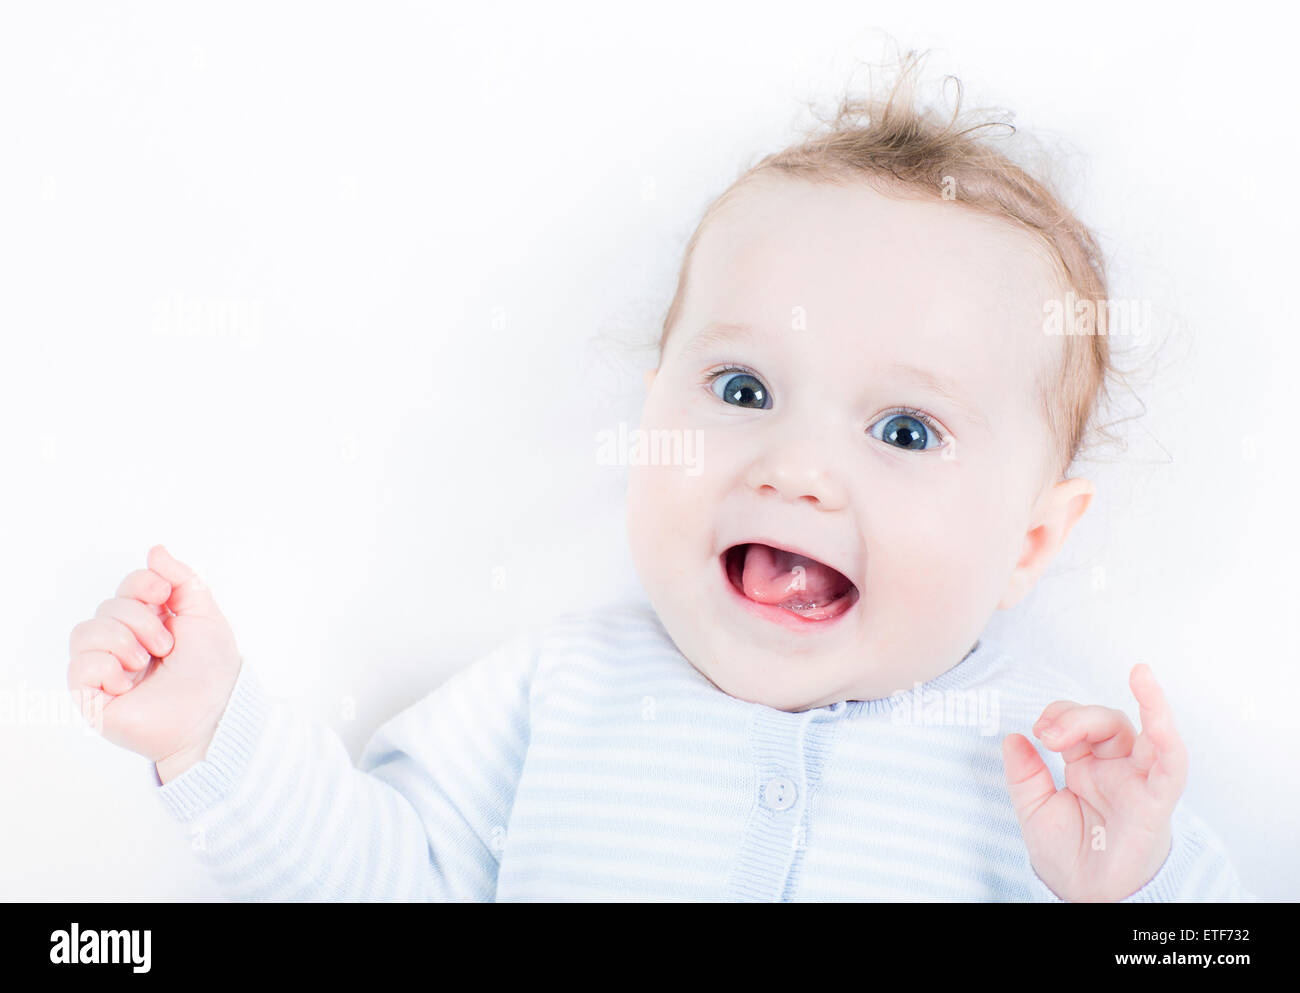 Very funny baby girl showing her tongue Stock Photo - Alamy